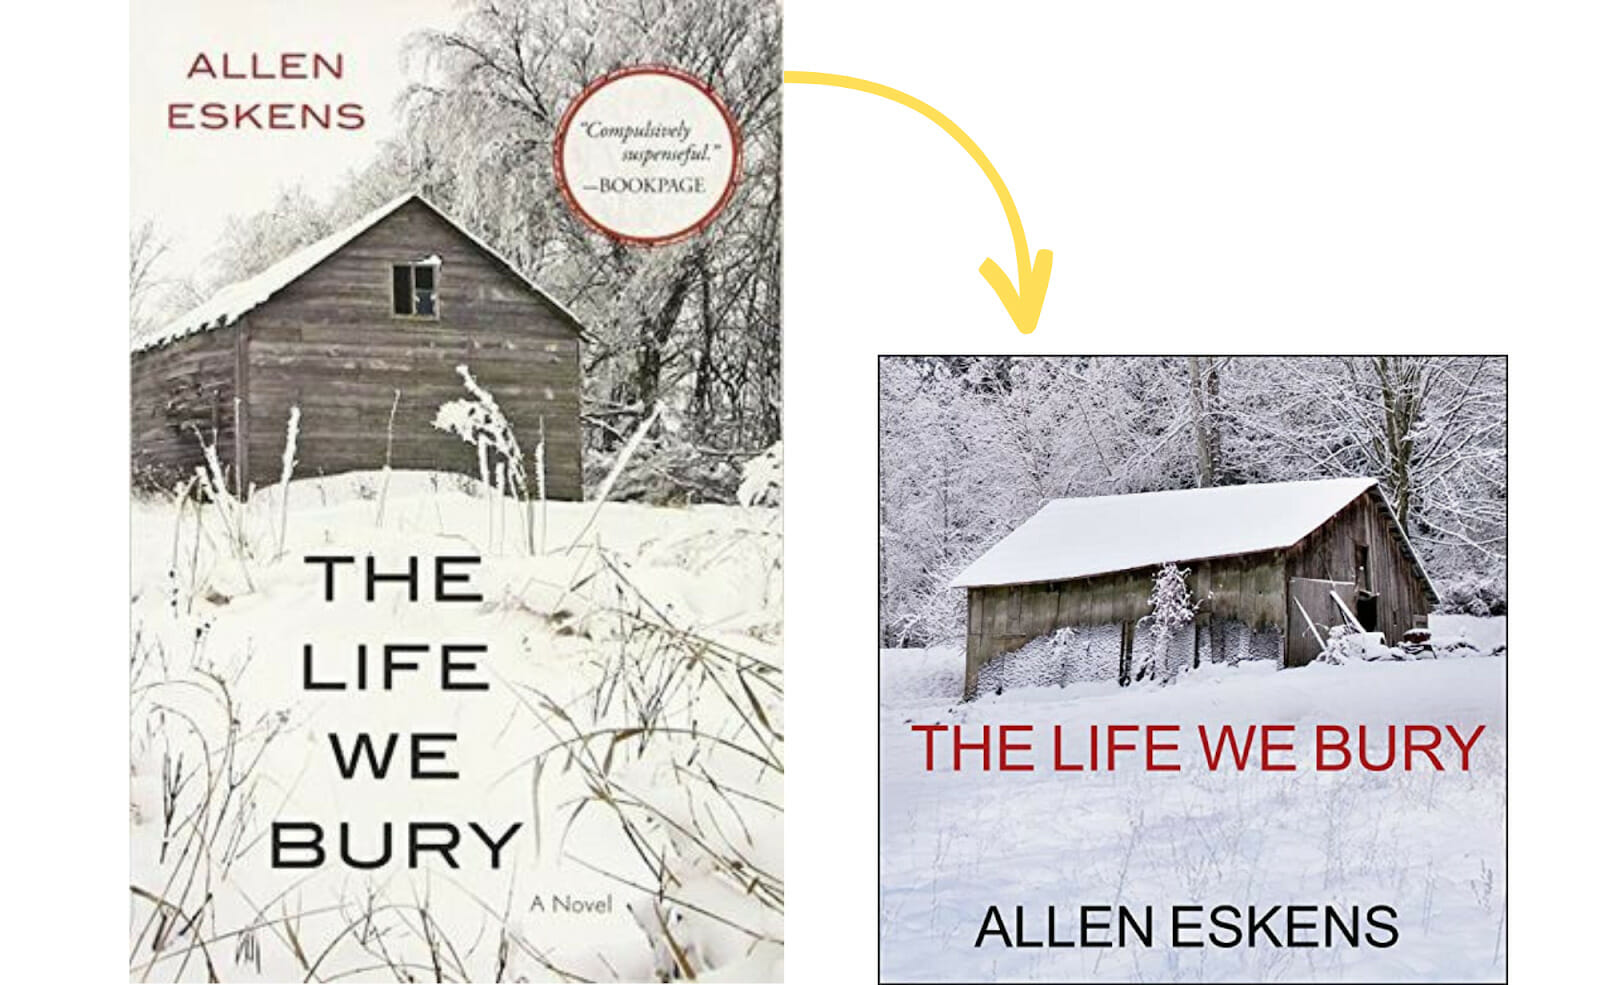 Designing audiobook covers featuring The Life We Bury by Allen Eskens